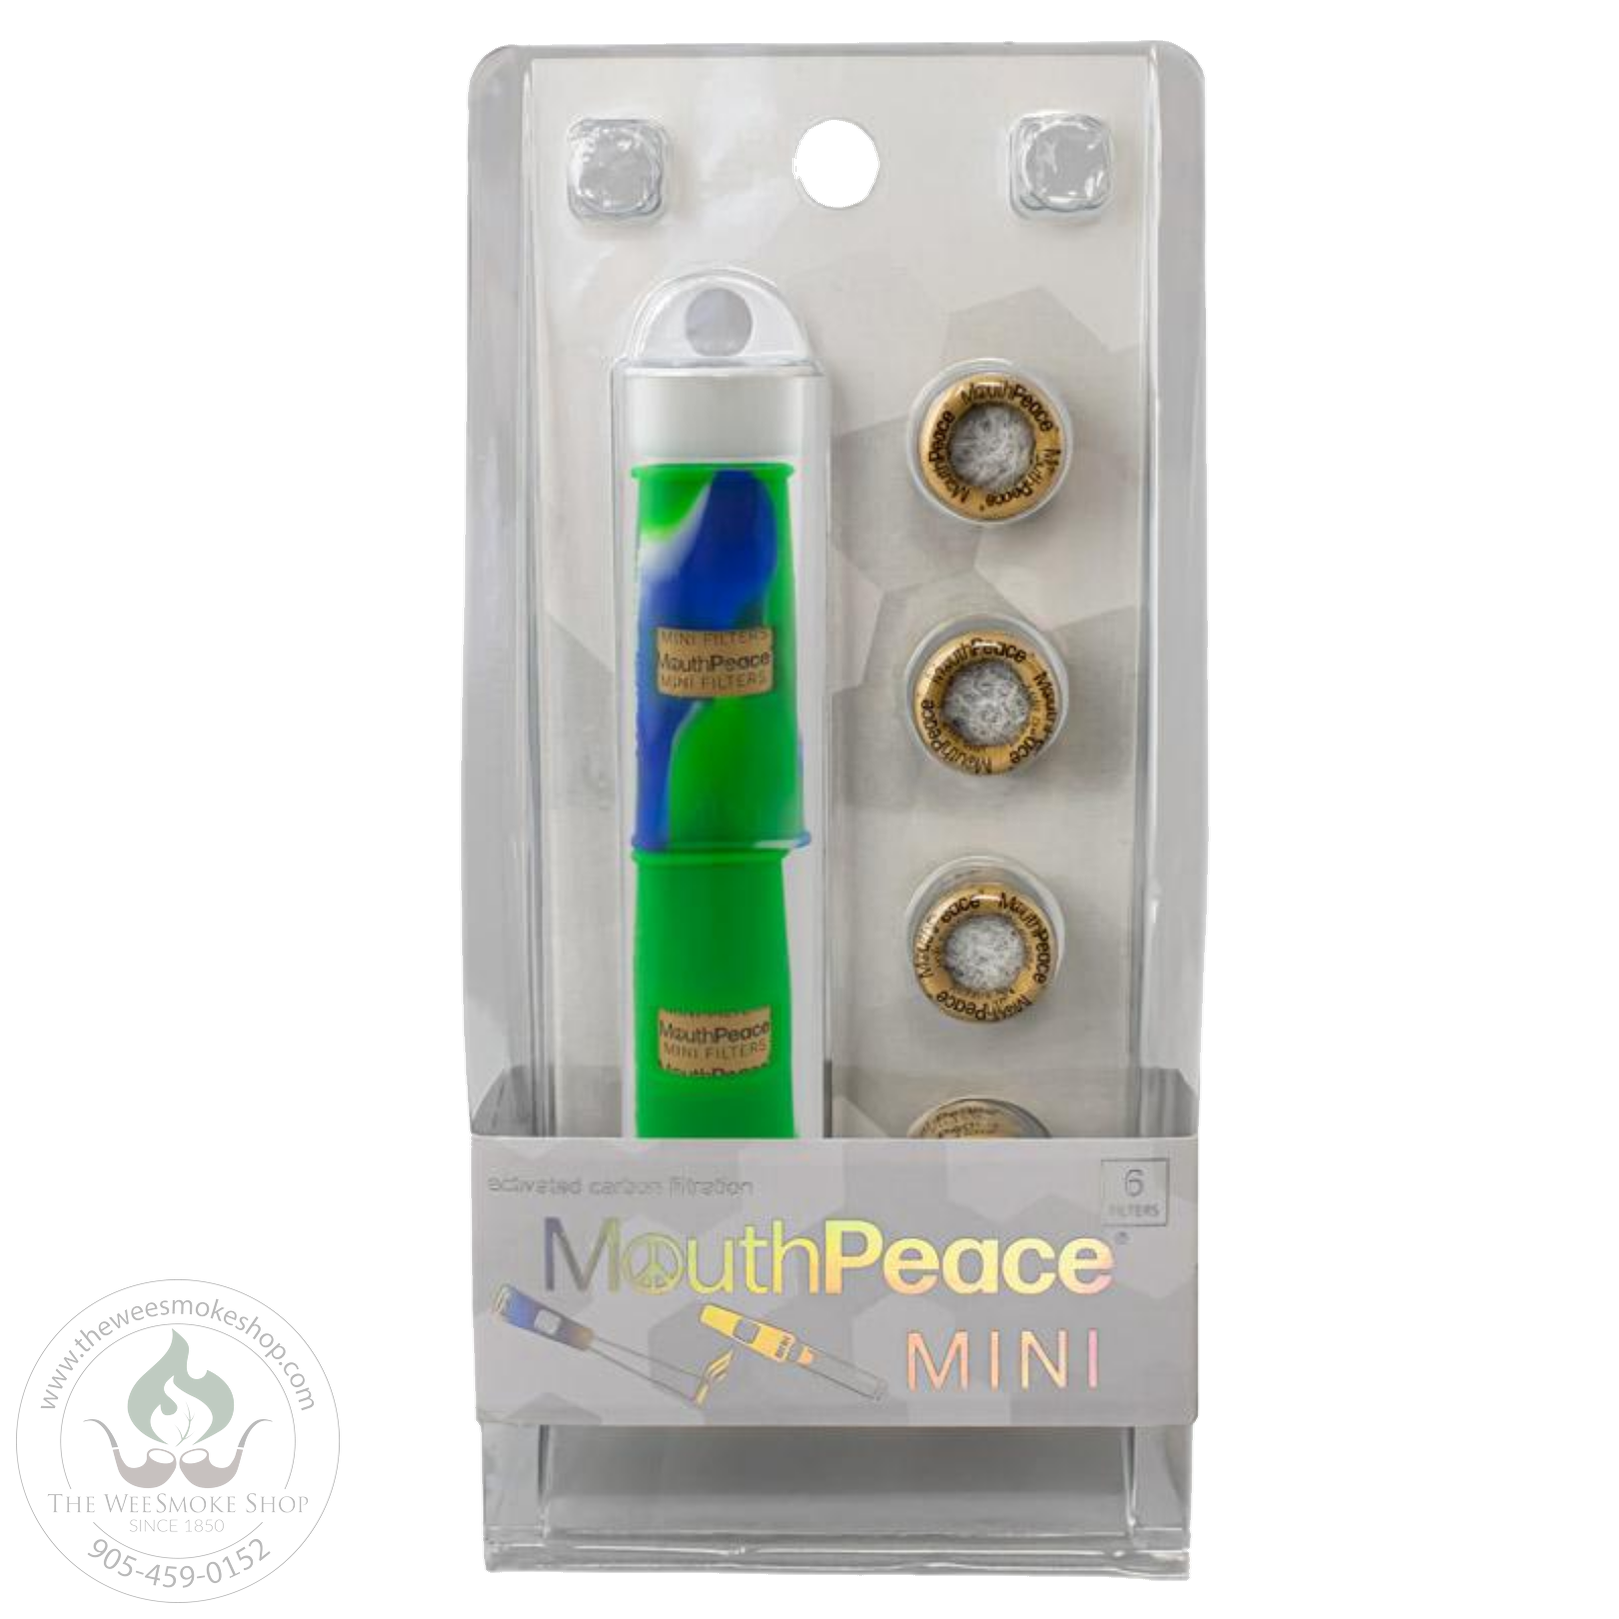 Moose Labs MouthPeace Mini in the color green and blue